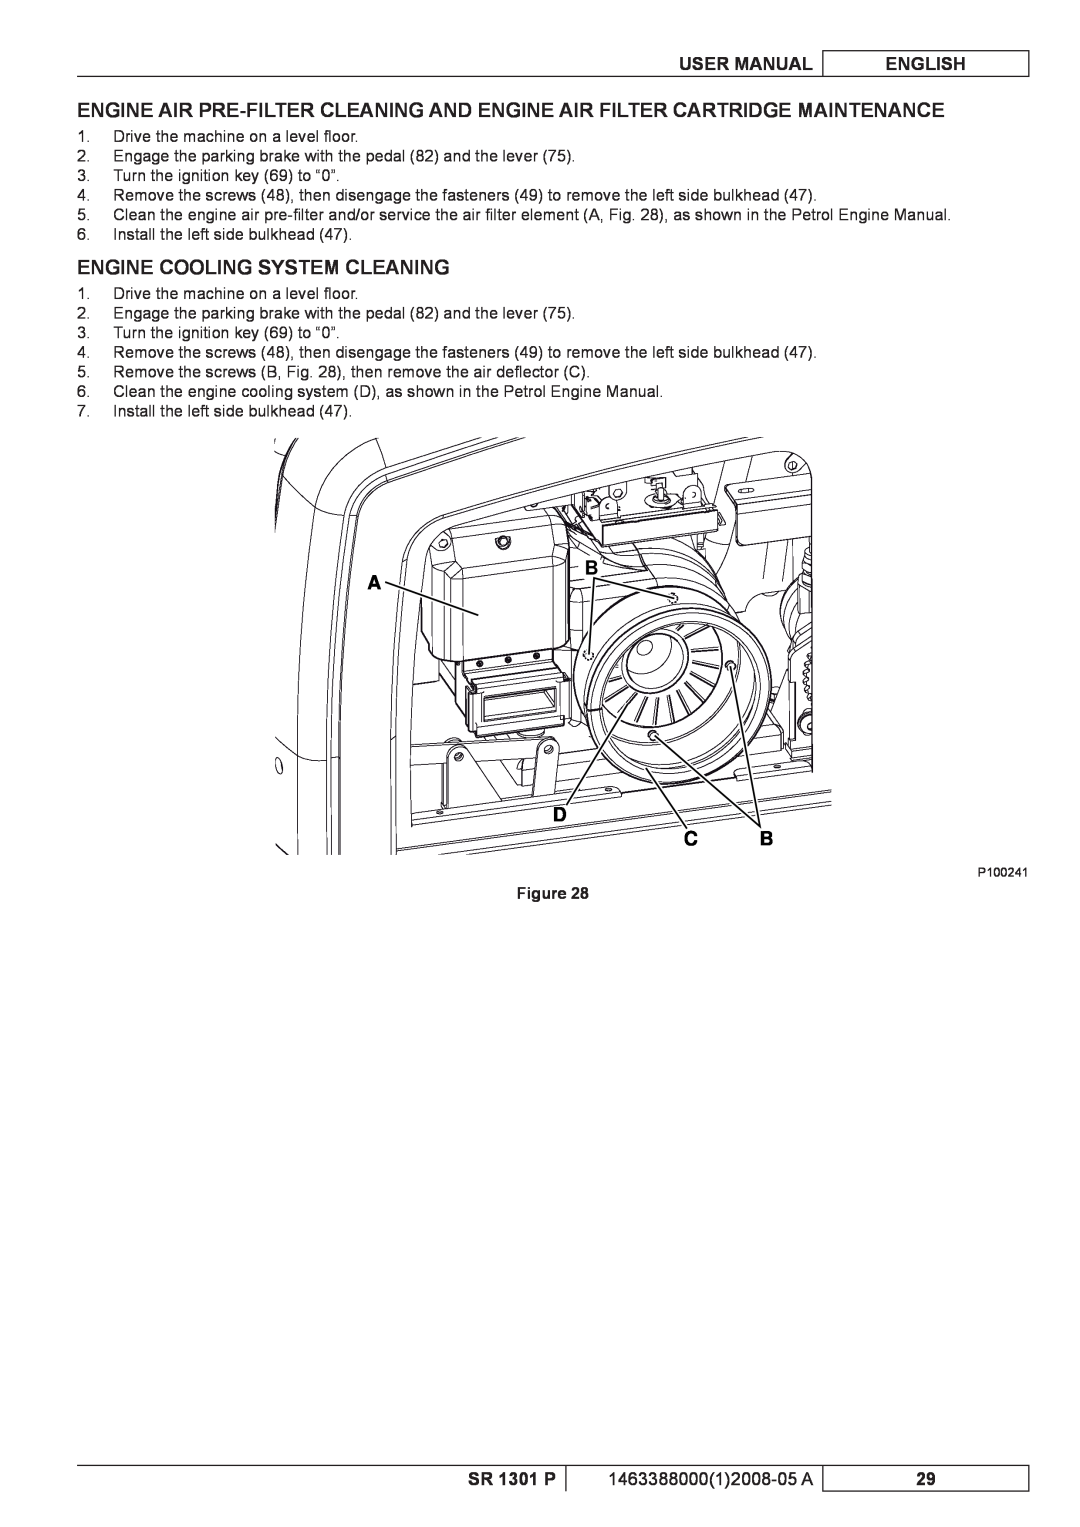 Nilfisk-ALTO SR 1301 P Engine Cooling System Cleaning, D C B, User Manual, English, 146338800012008-05 A 